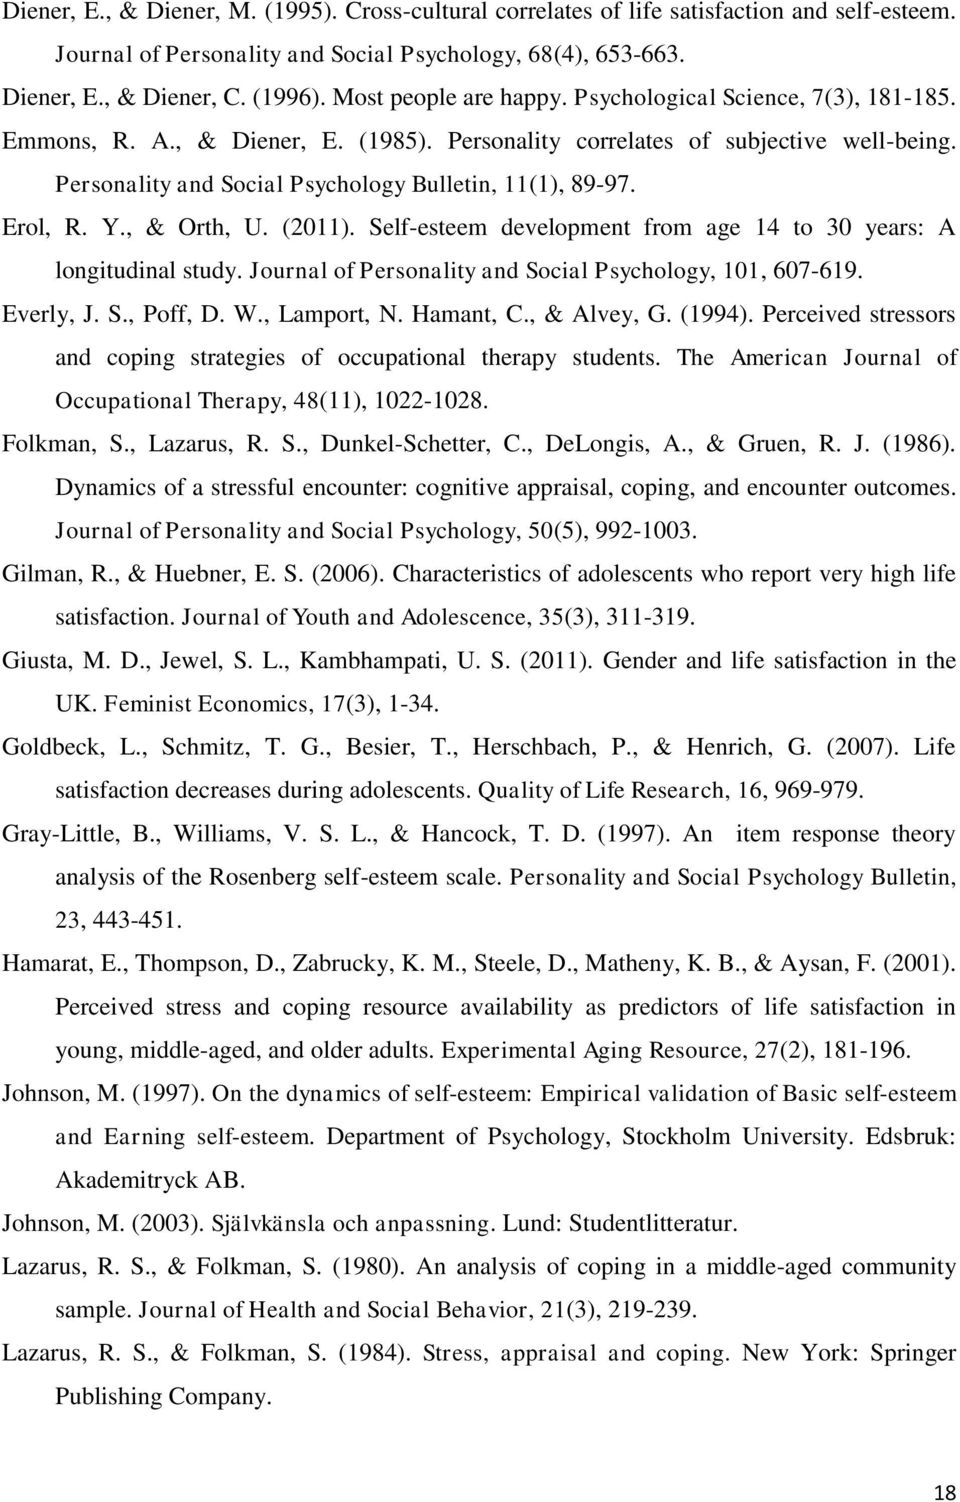 Personality and Social Psychology Bulletin, 11(1), 89-97. Erol, R. Y., & Orth, U. (2011). Self-esteem development from age 14 to 30 years: A longitudinal study.